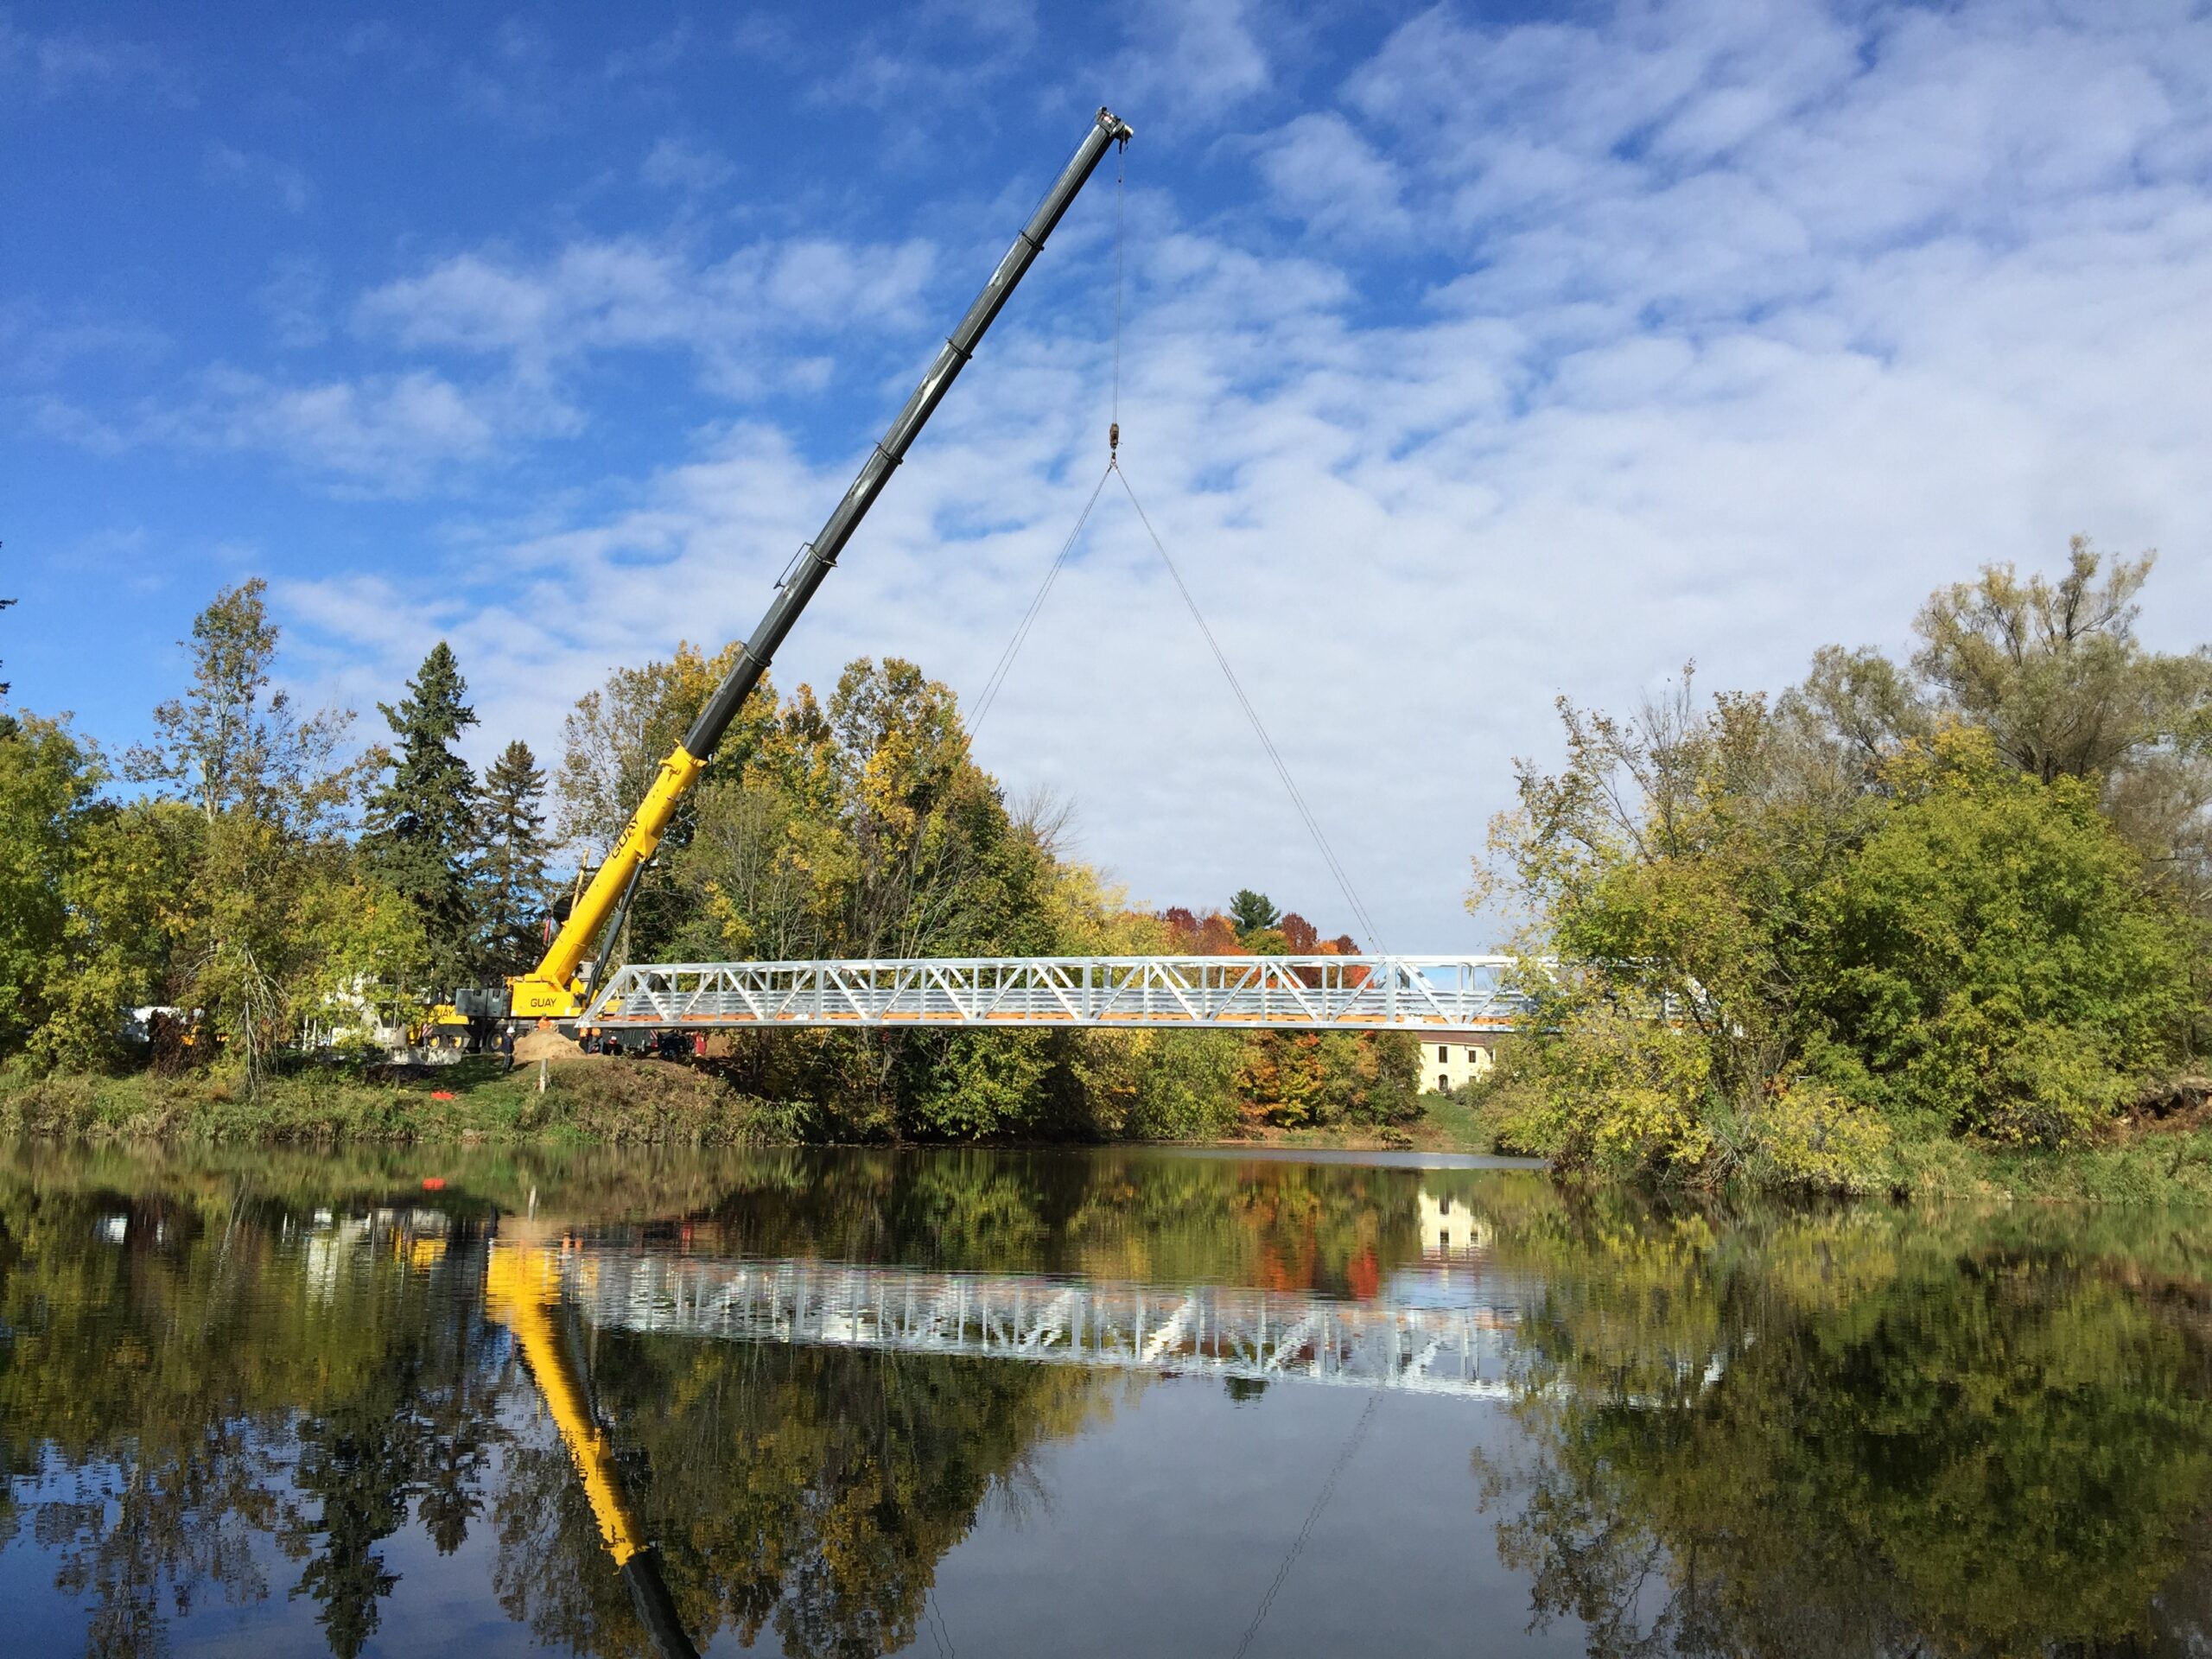 Prefabricated aluminum footbridge being lowered into place by crane